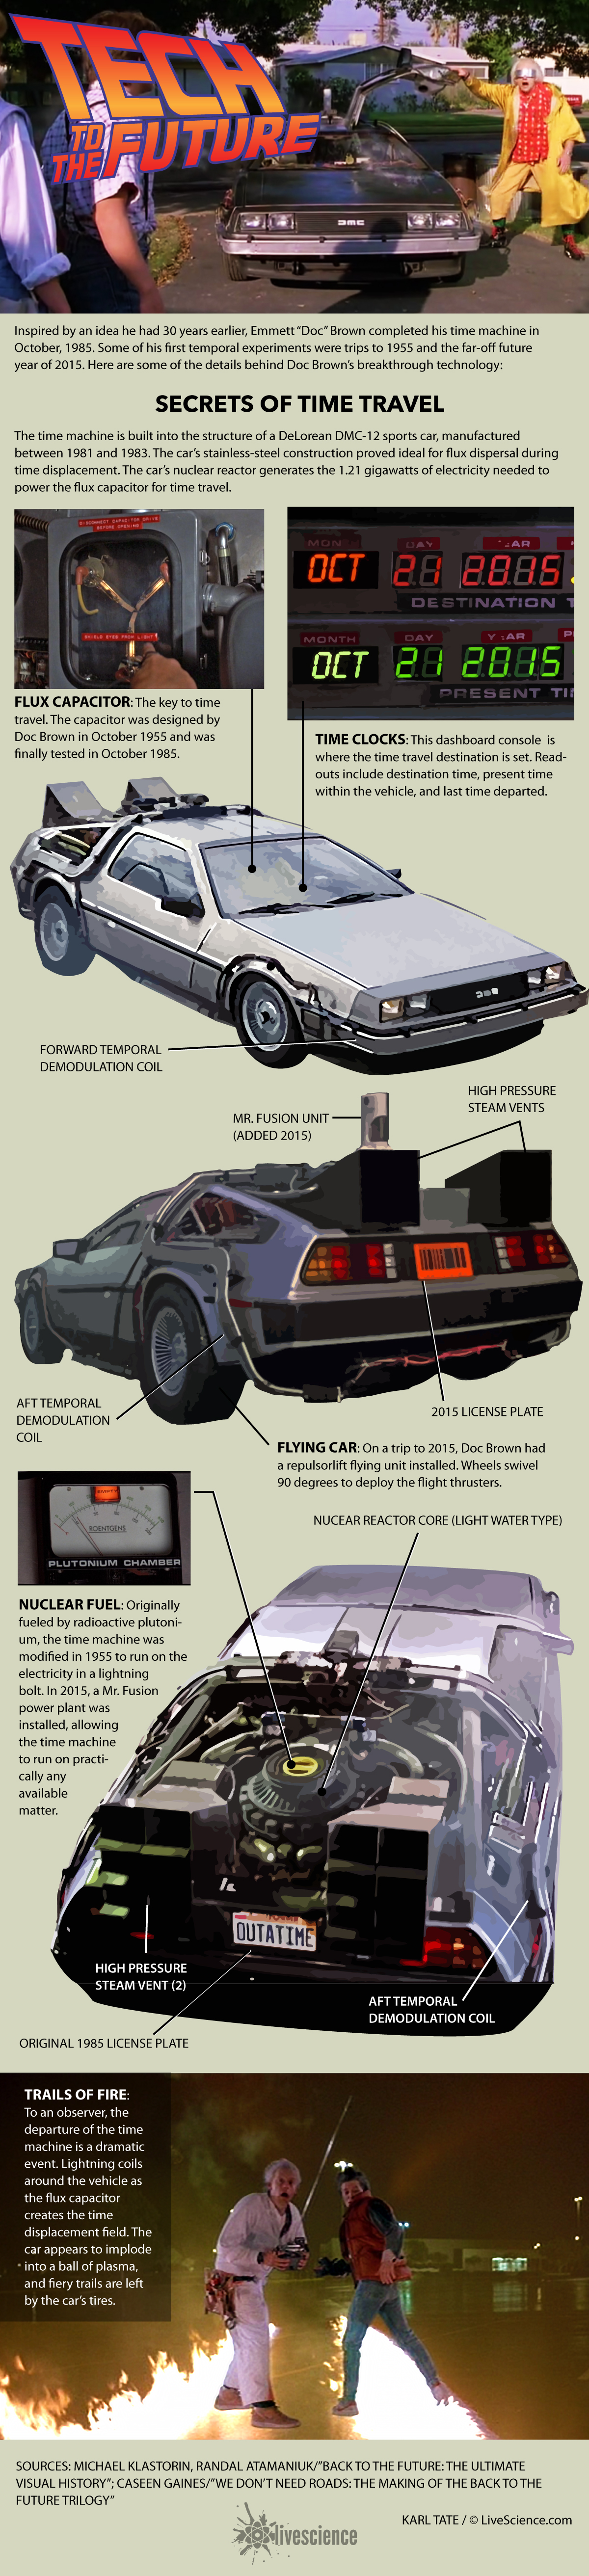 A Time Machine Out Of A DeLorean?